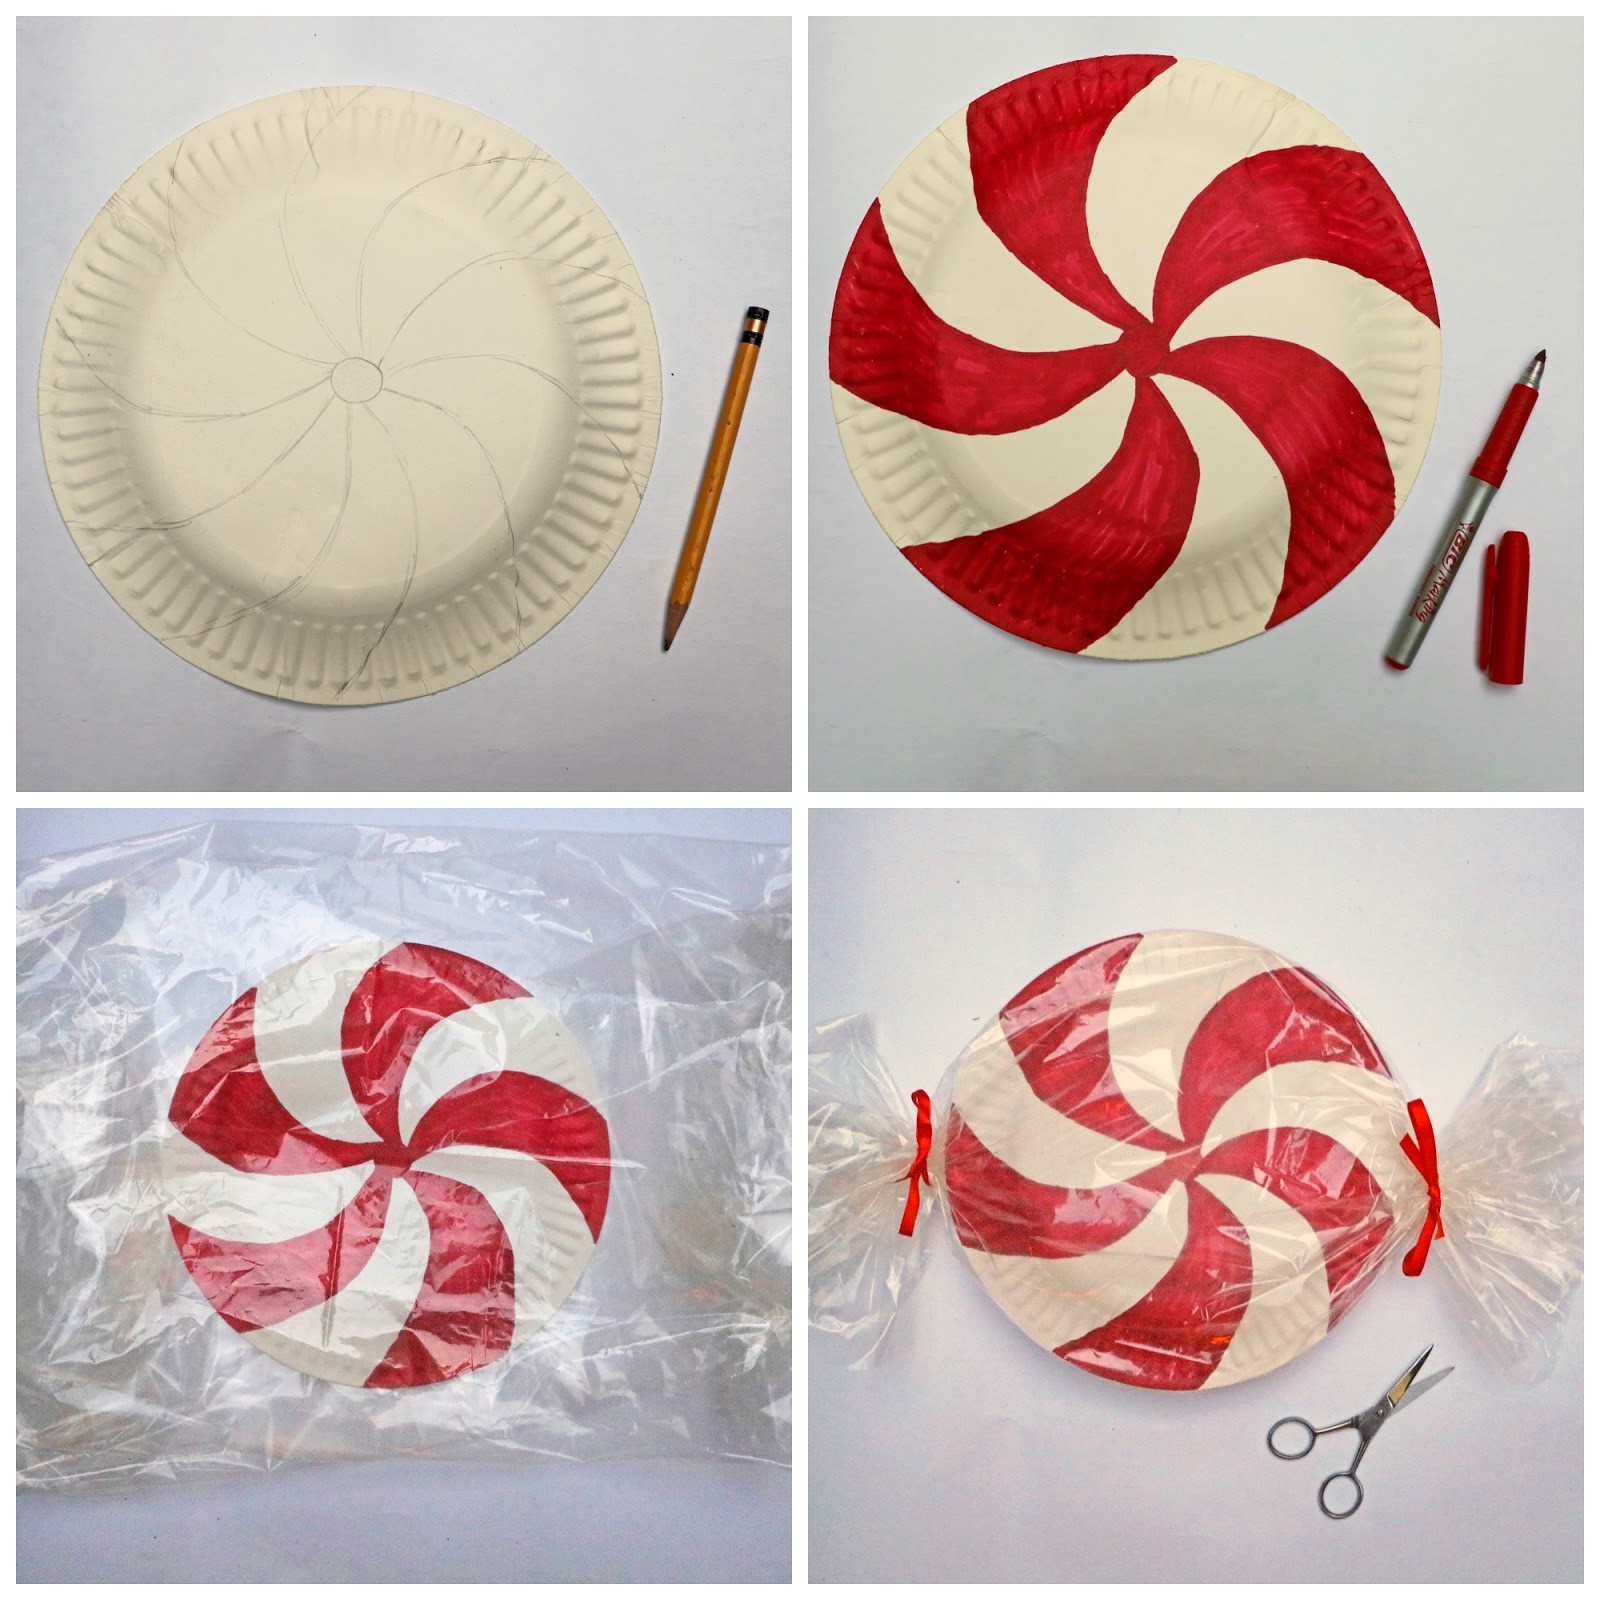 These peppermints are made out of paper plates and make adorable Christmas home decorations! Click through for full tutorial